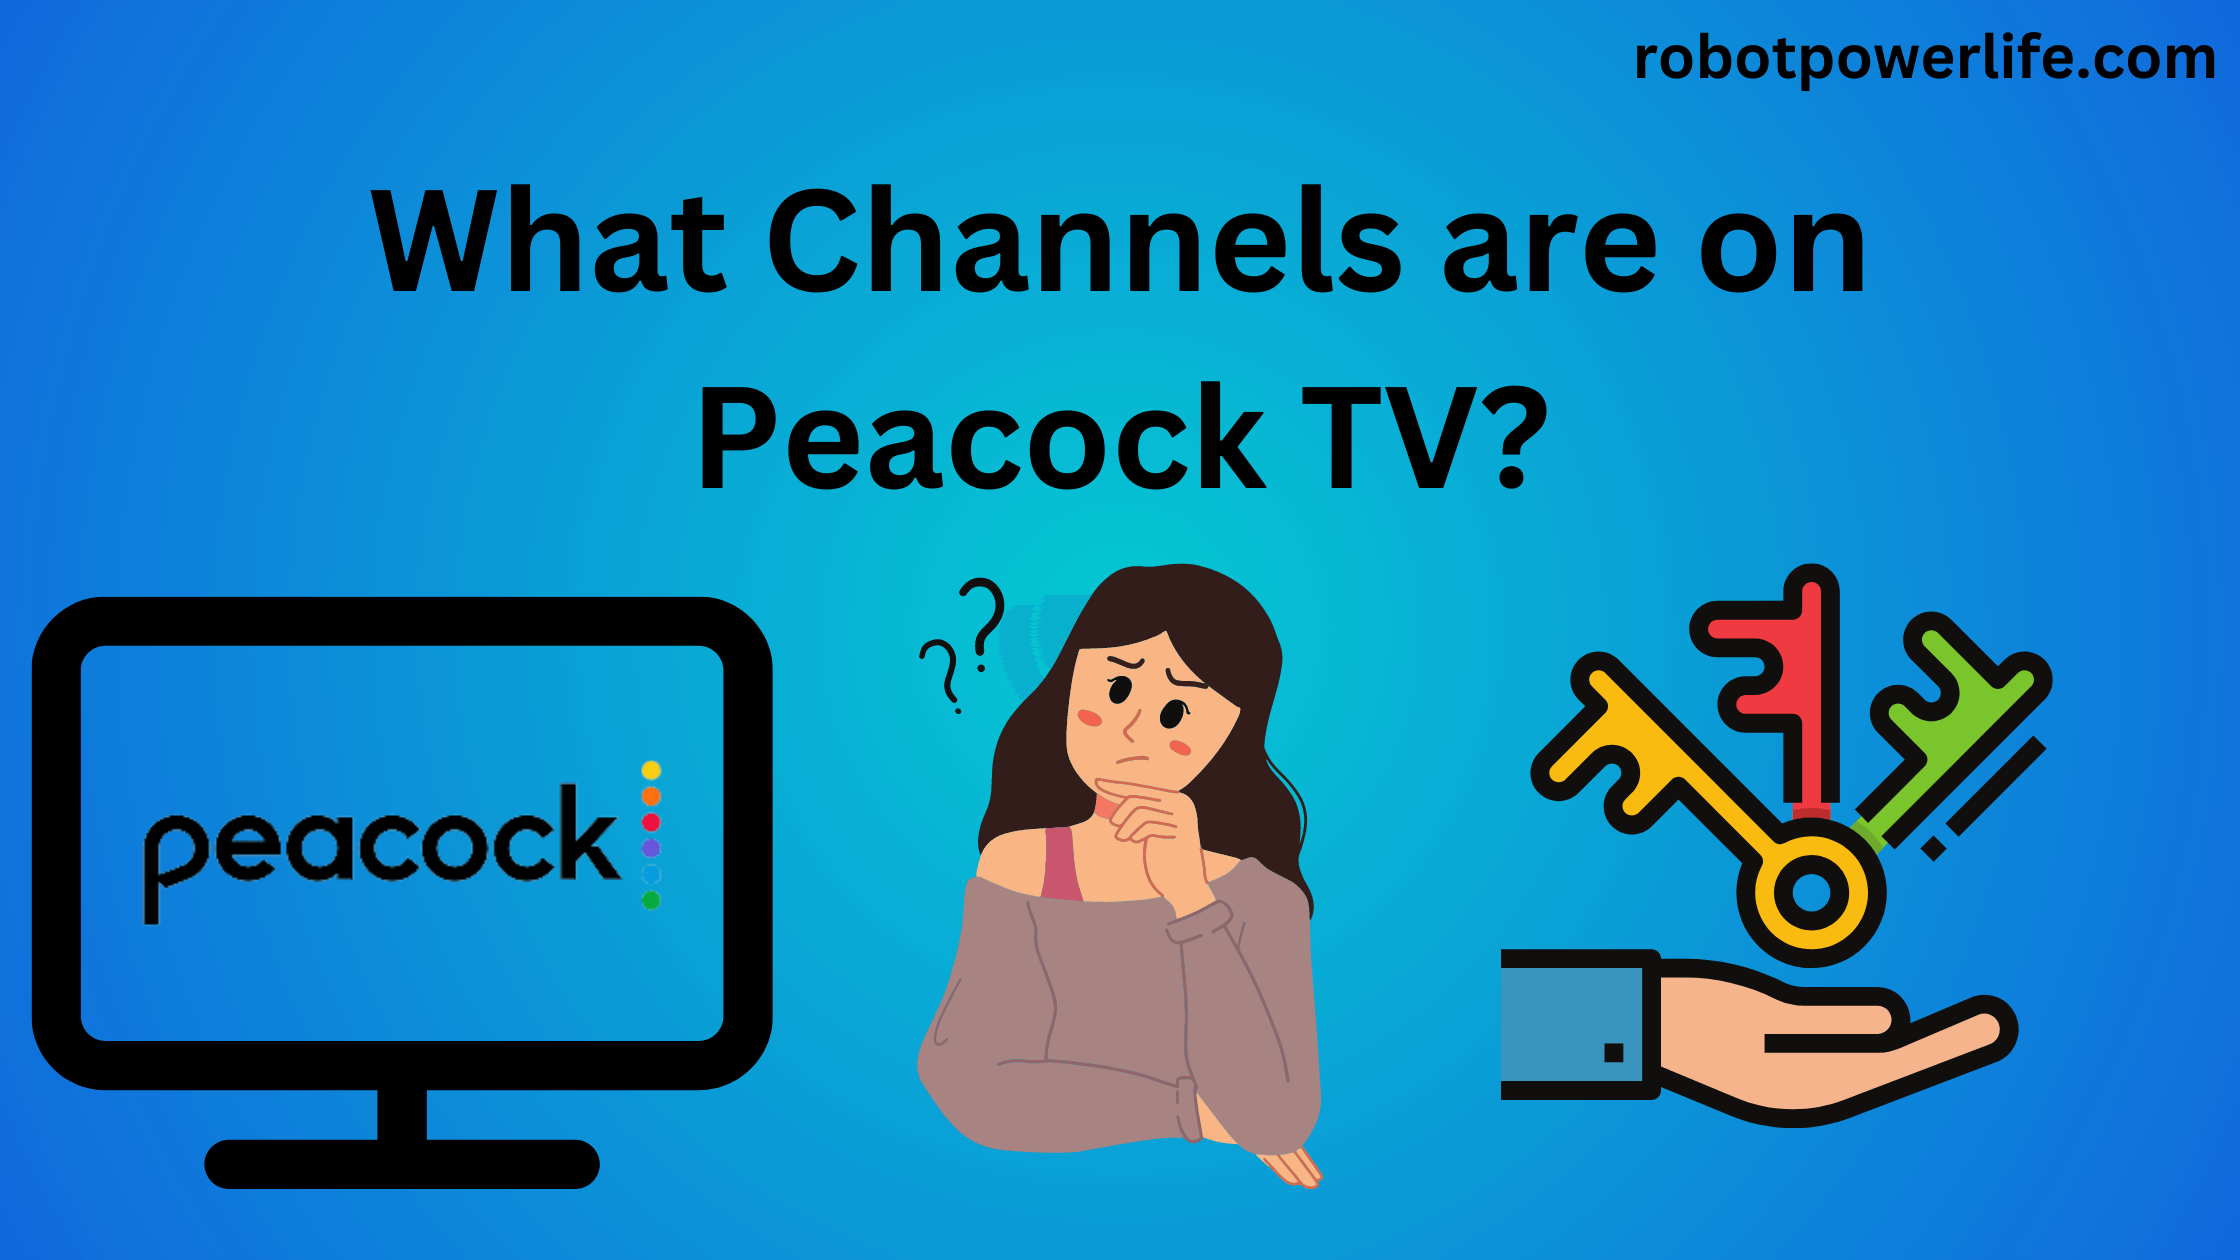 What Channels are on Peacock TV?